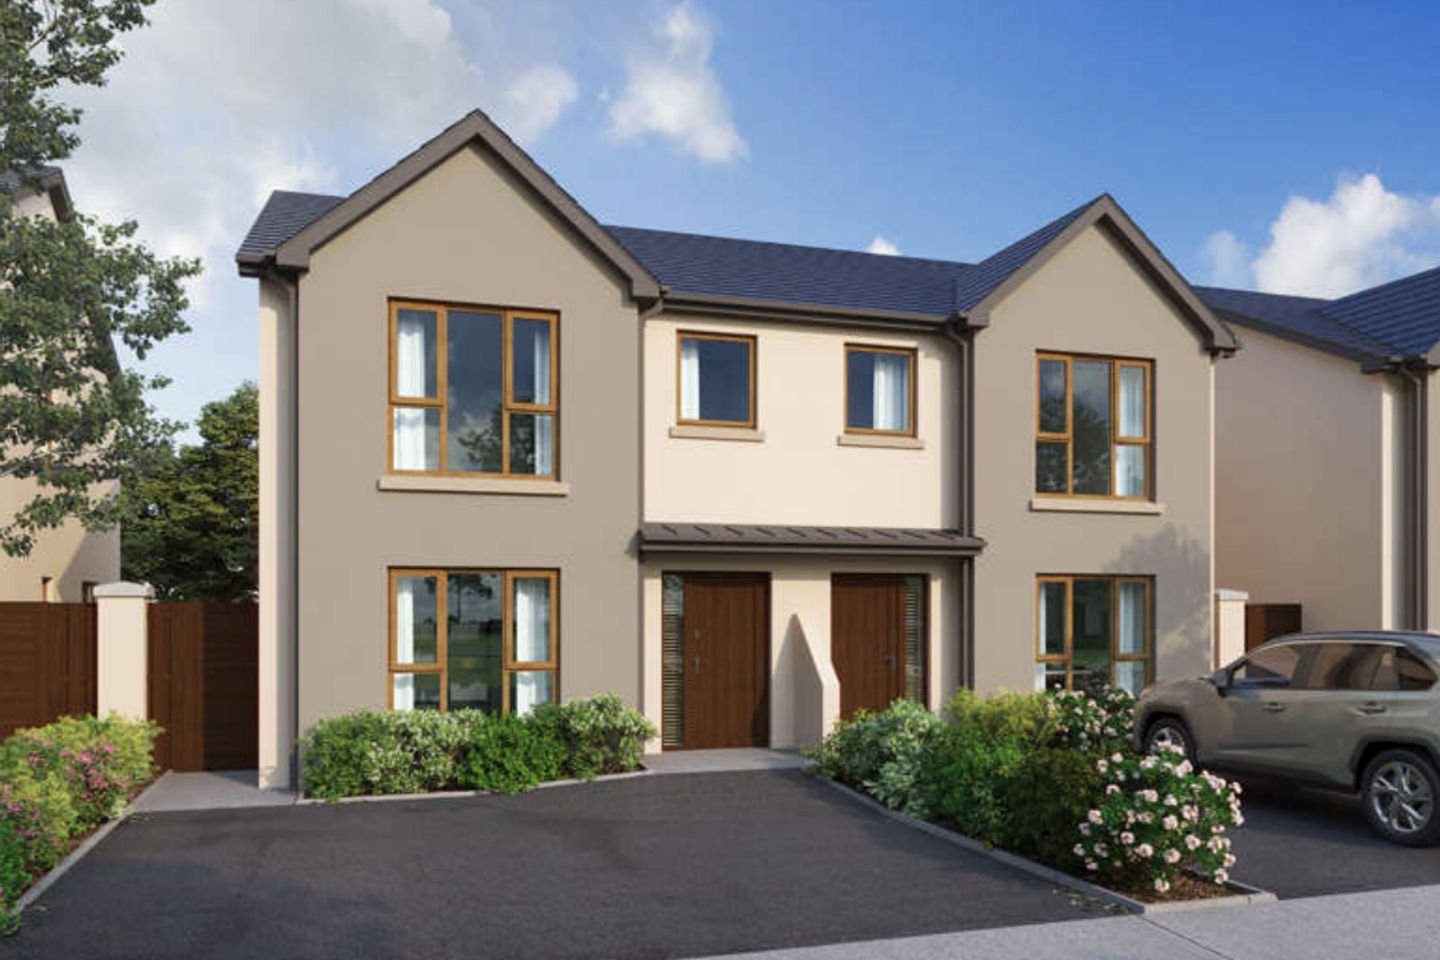 House Type D - 3-Bed Semi-Detached, Lakeview, Lakeview, Glenamaddy, Glenamaddy, Co. Galway